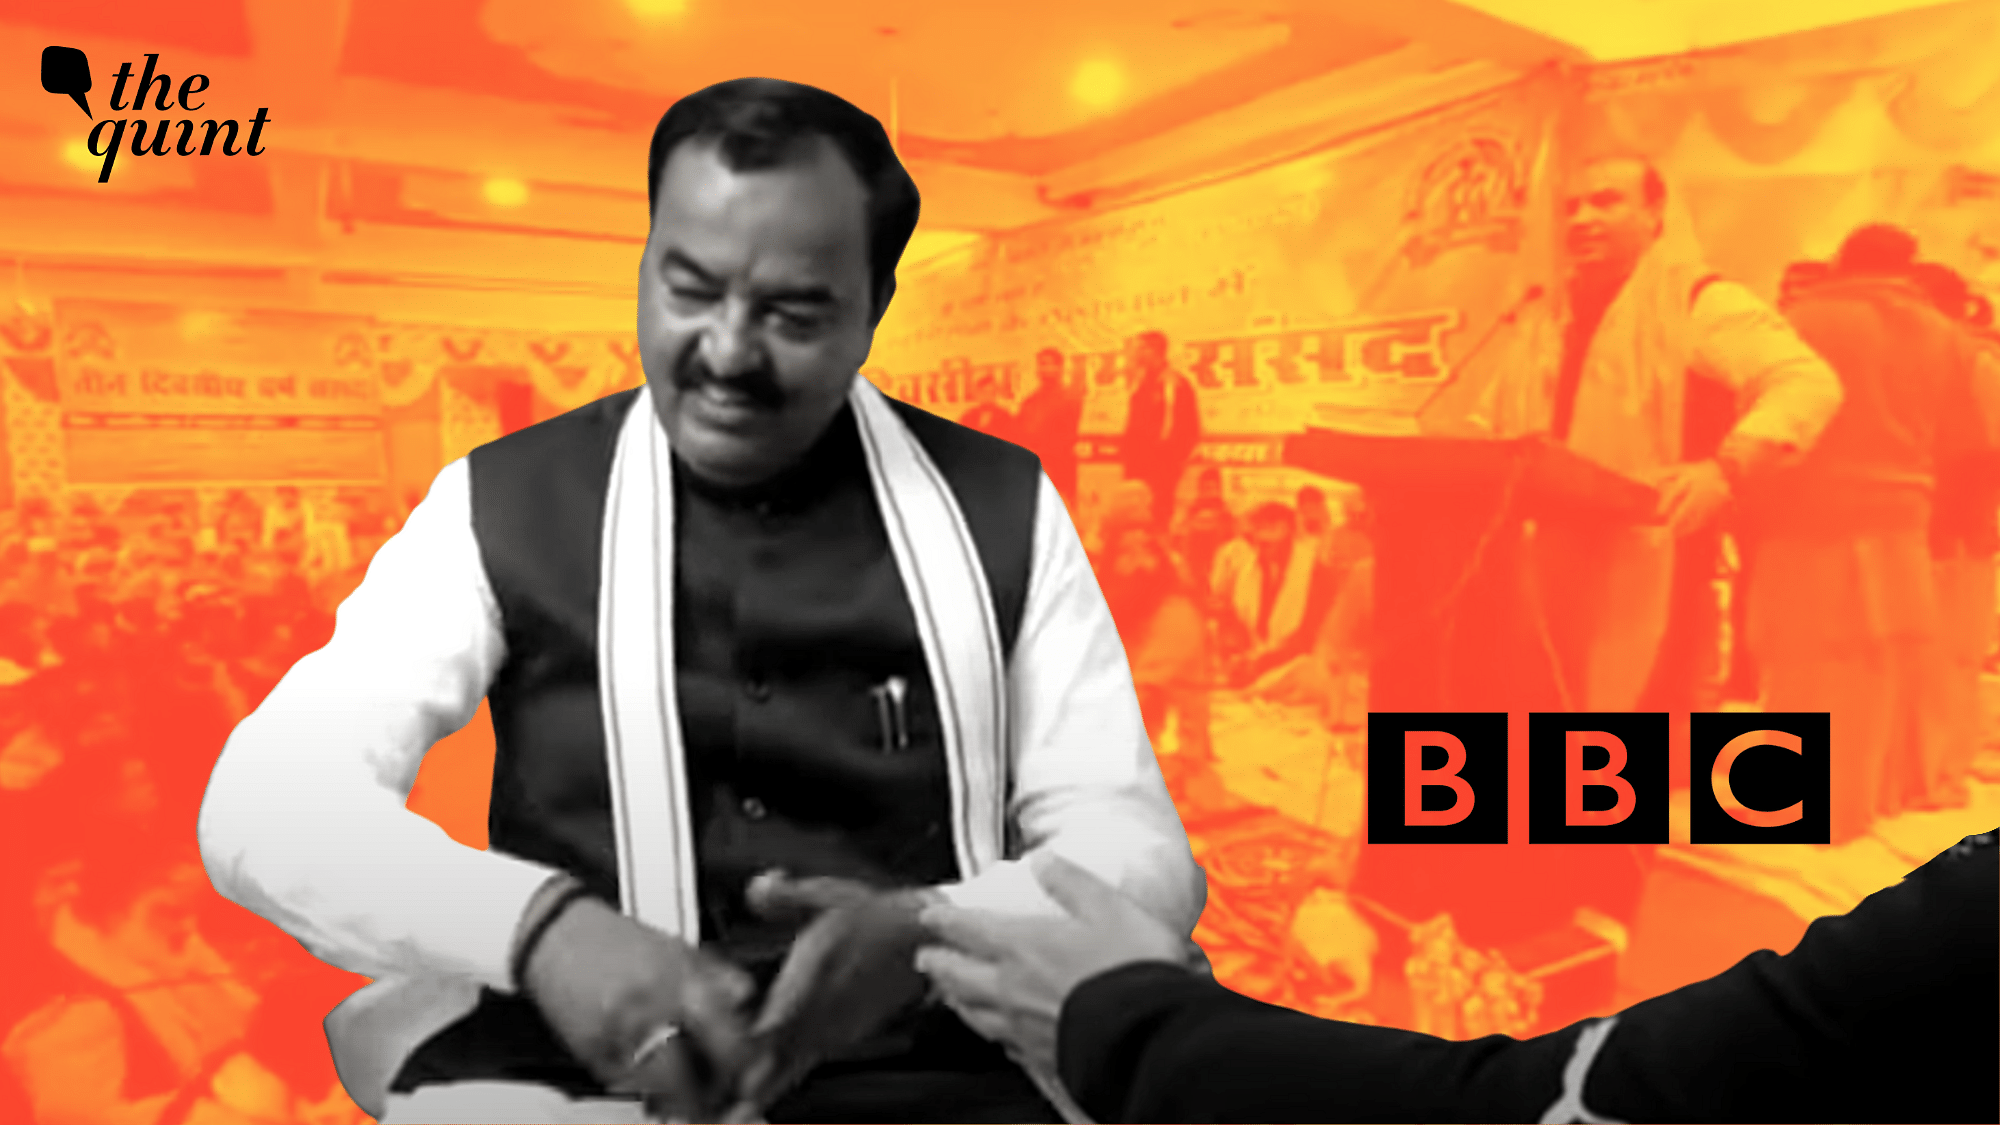 <div class="paragraphs"><p>Uttar Pradesh Deputy Chief Minister Keshav Prasad Maurya got visibly agitated at his interviewer when asked about the genocidal calls made against Muslims in Haridwar’s 'Dharam Sansad.'</p></div>